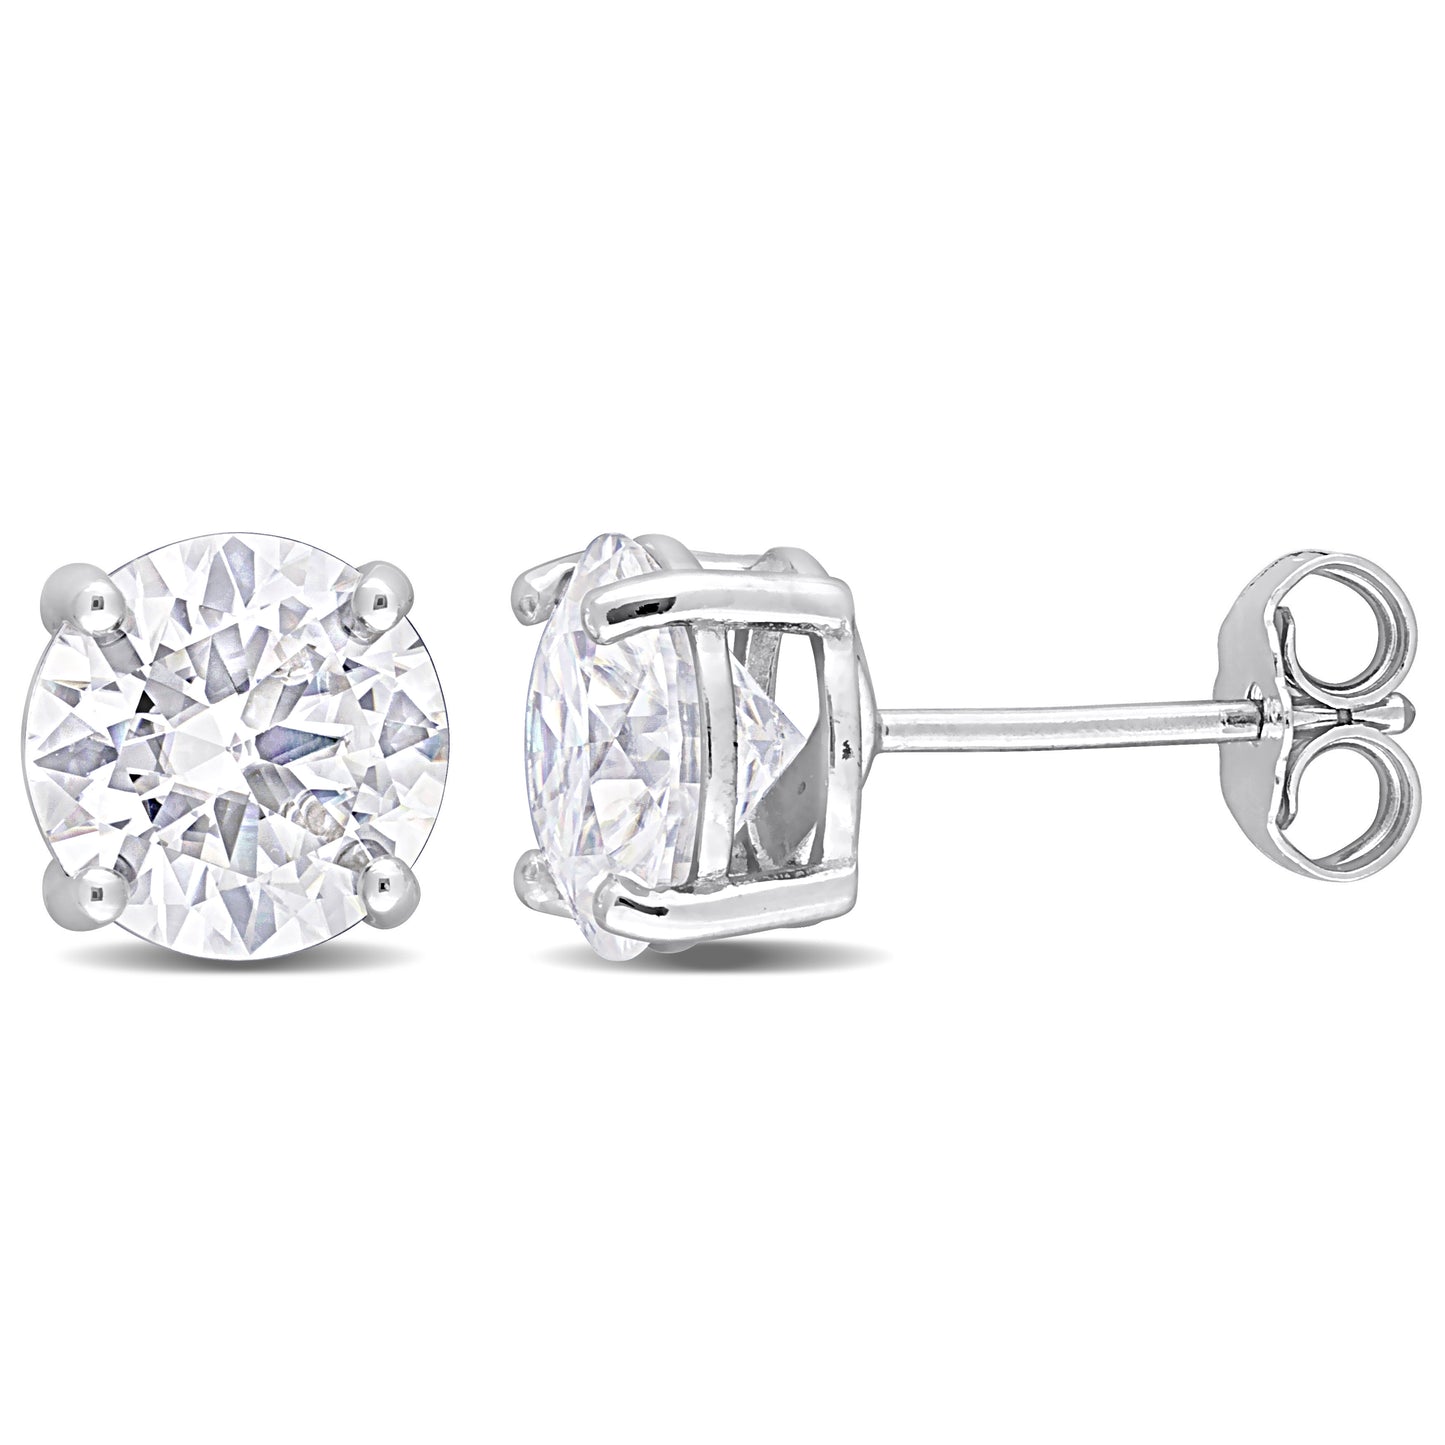 3 3/4ct Round Cut Moissanite Studs in Sterling Silver